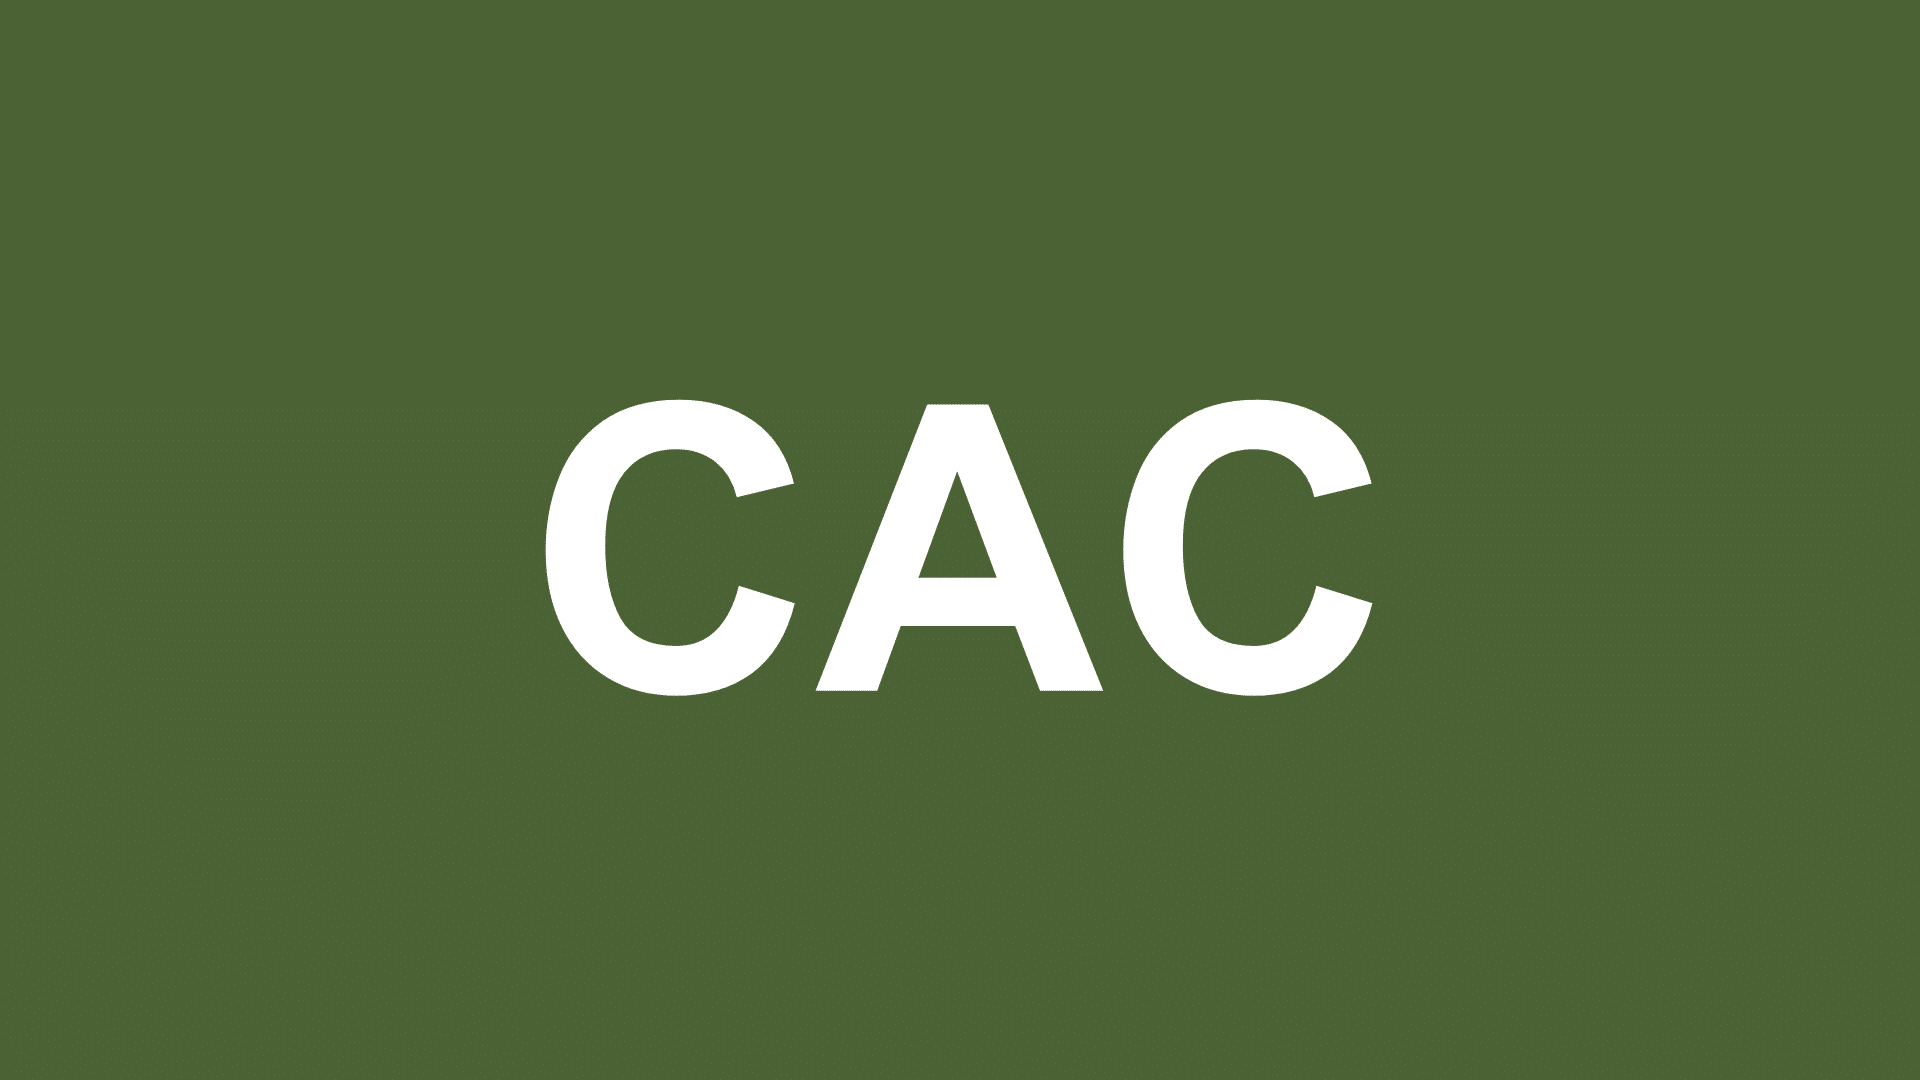 Text that reads "CAC"